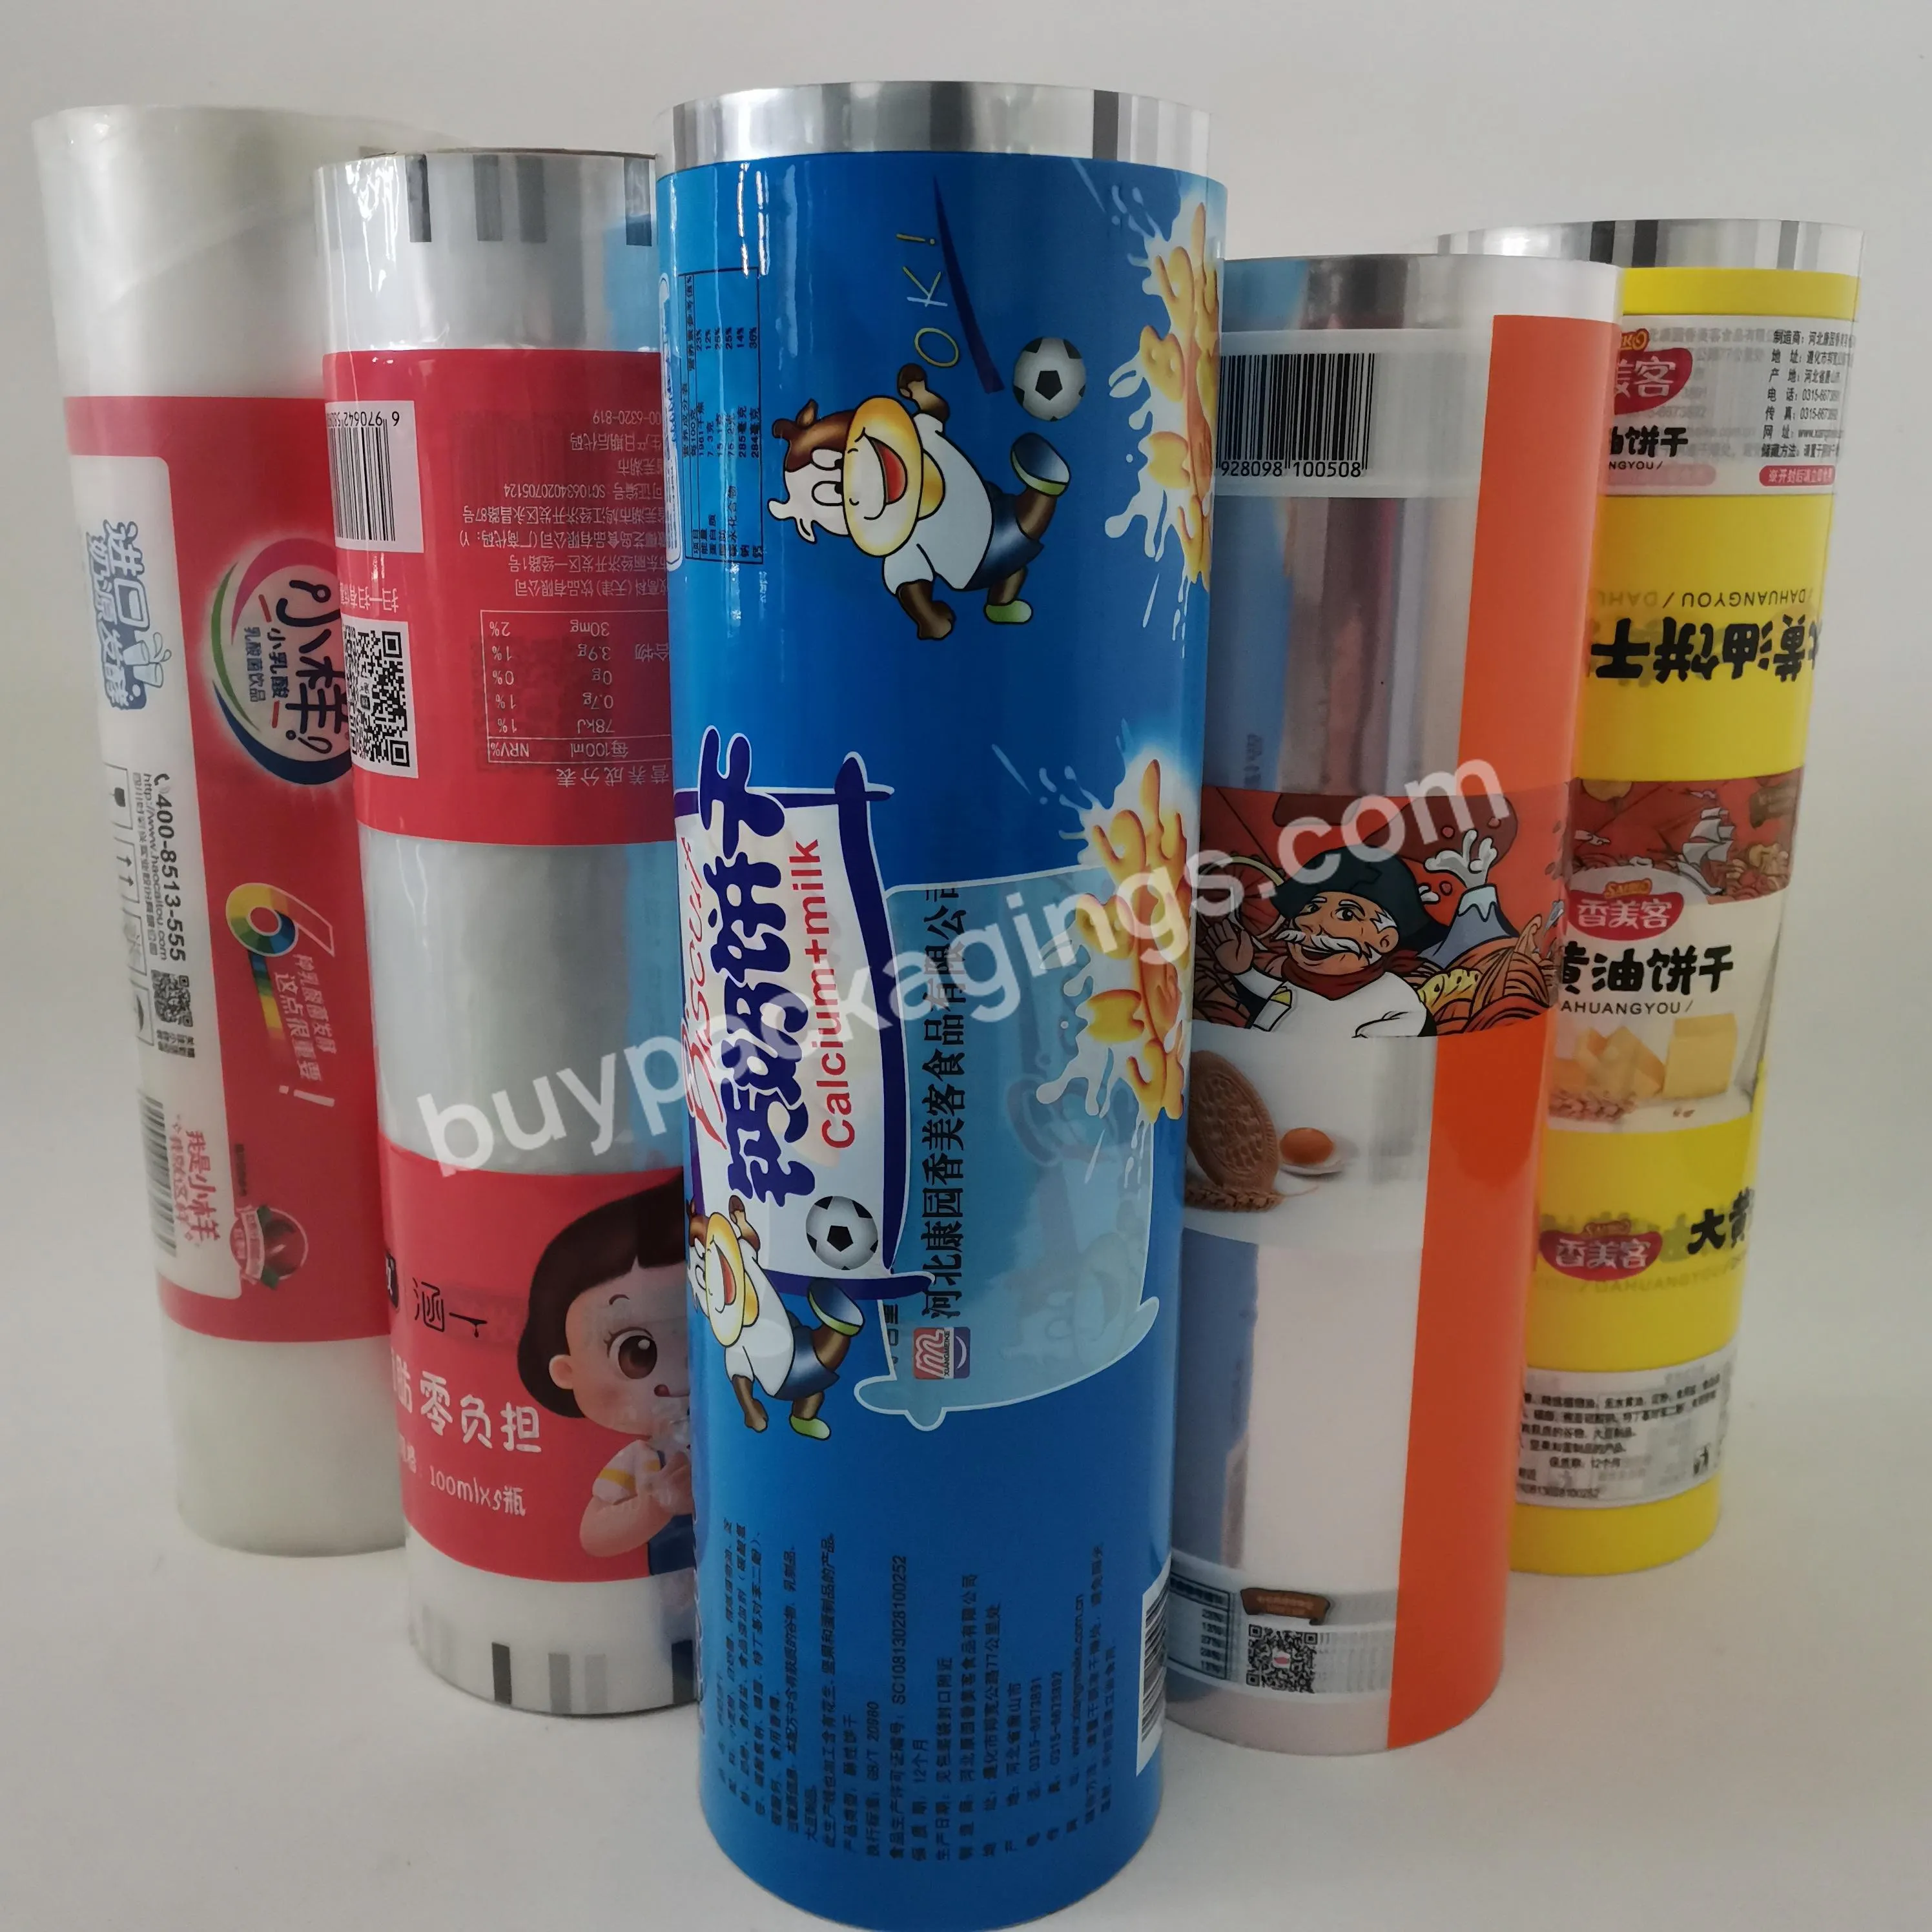 Yunfeng Printed Plastic Cold Laminating Ldpe/pe Aluminium Food Sachet Package Crisps Pouch Potato Chips Packaging Bag Roll Film - Buy Laminating Material Packaging Roll Film,Laminating Film Roll,Laminated Film Packaging.